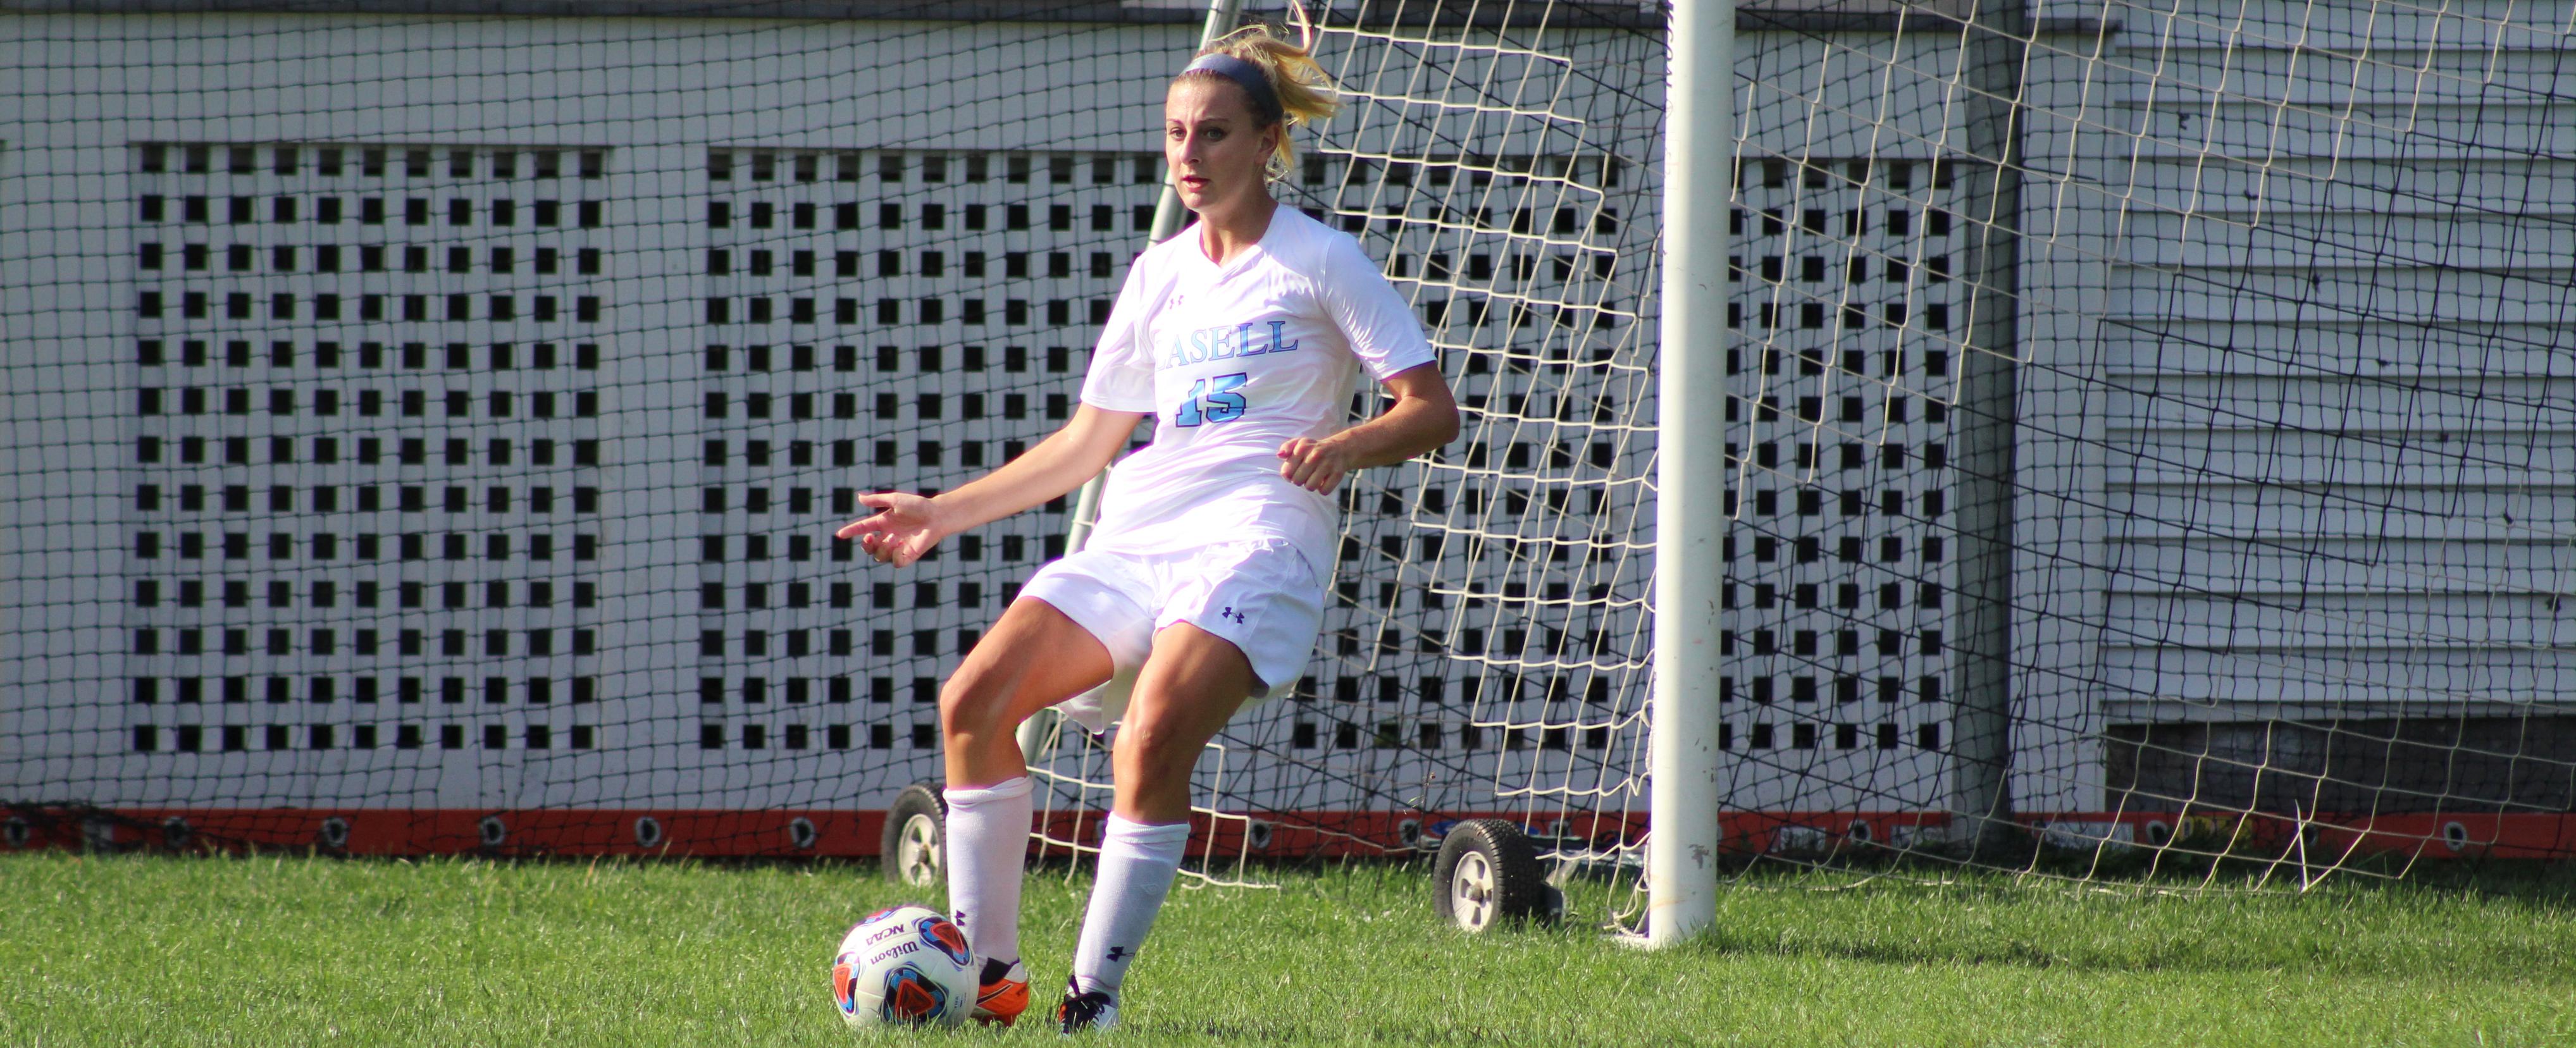 Women's Soccer Drops Home Opener to Keene State